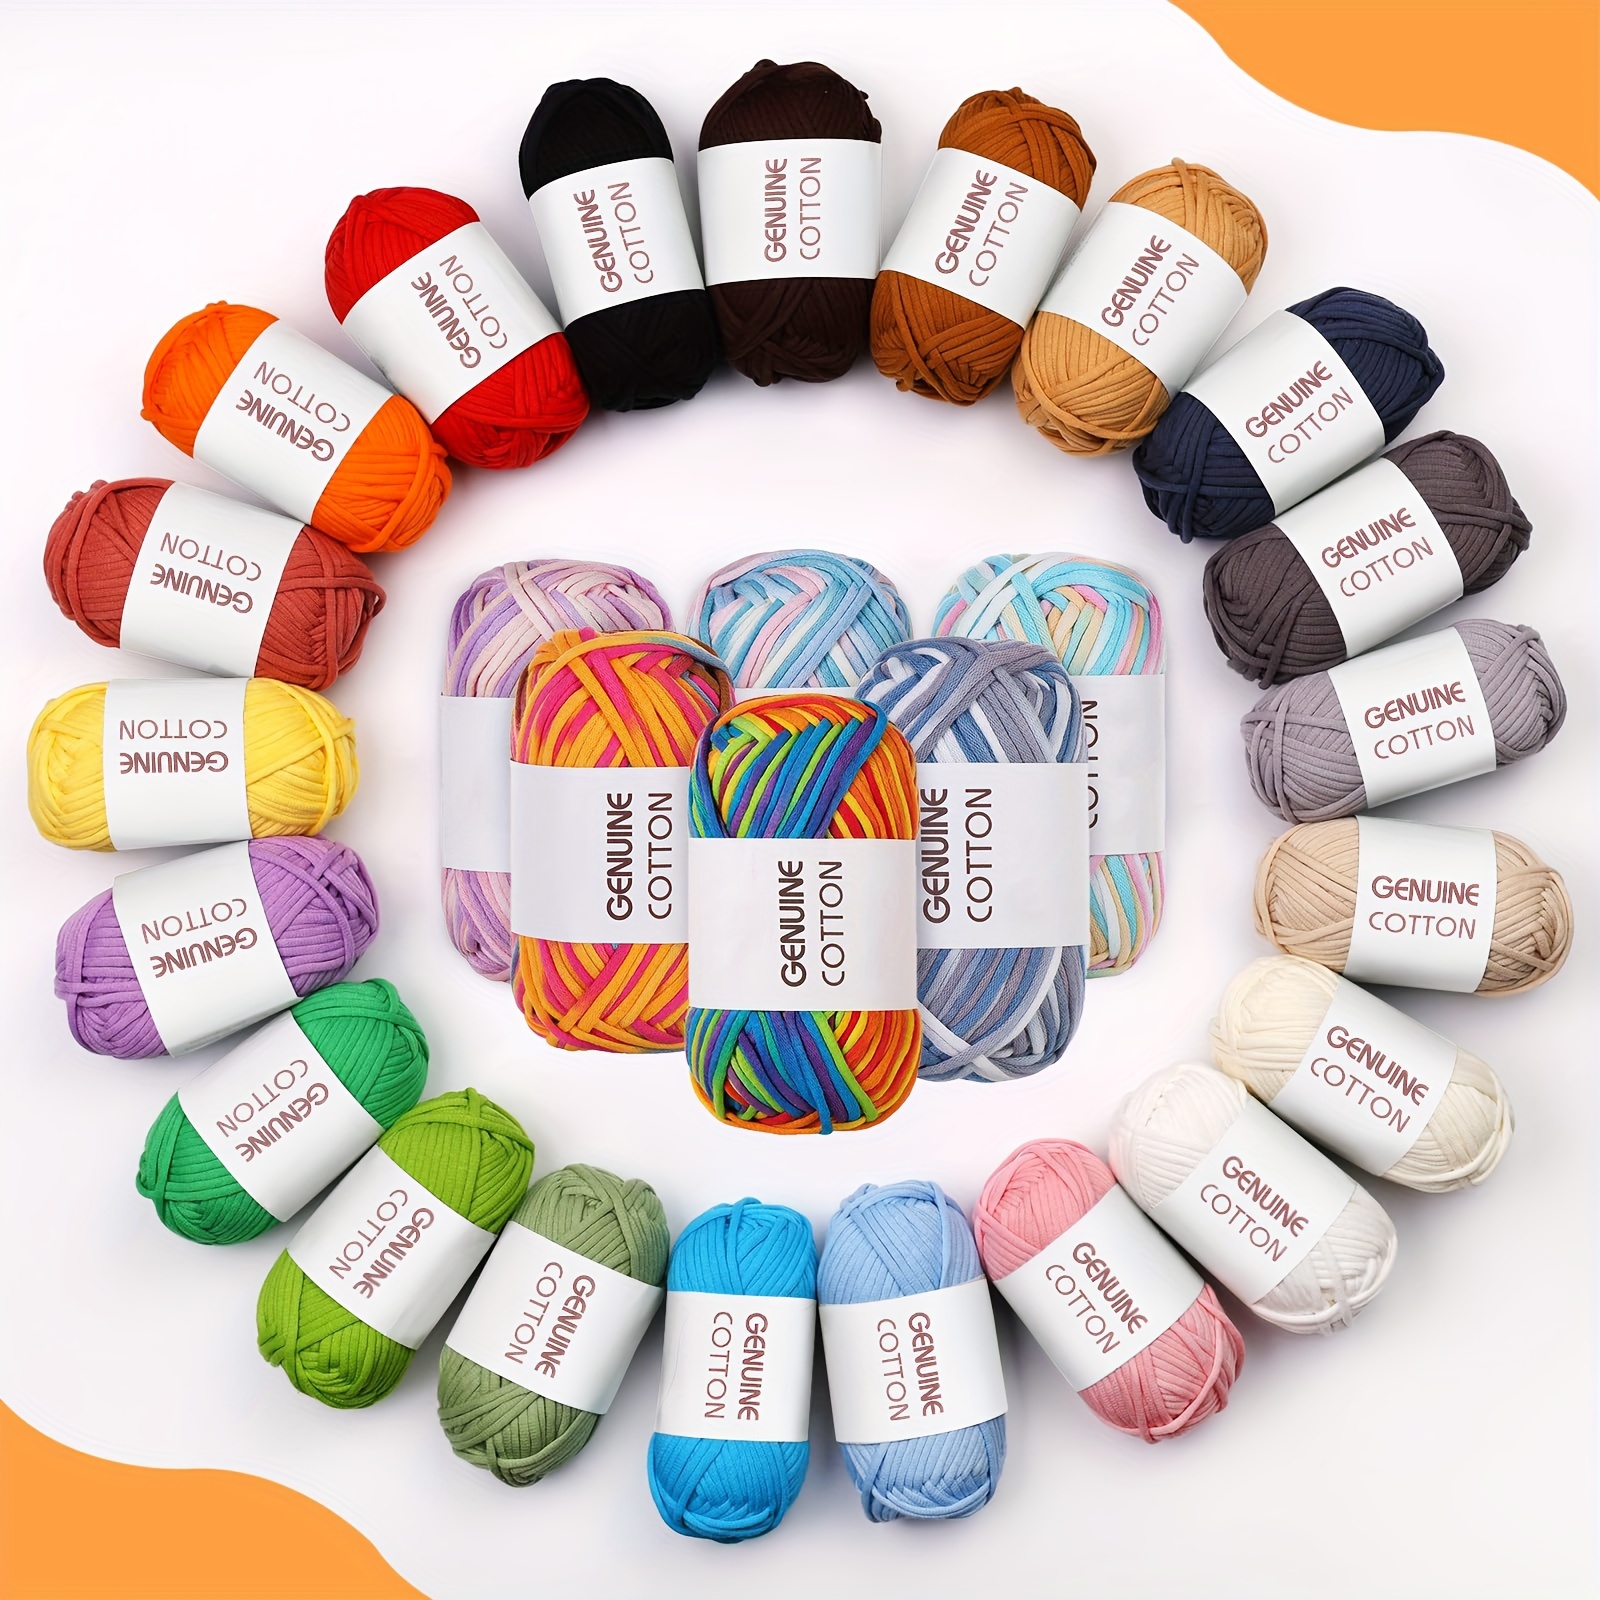 

Beginner-friendly Crochet Yarn - Soft, Skin-friendly Cotton Blend (68% Cotton, 32% Nylon), Easy Stitch Visibility, 50g Roll - Perfect For Diy Projects, Available In Multiple Colors